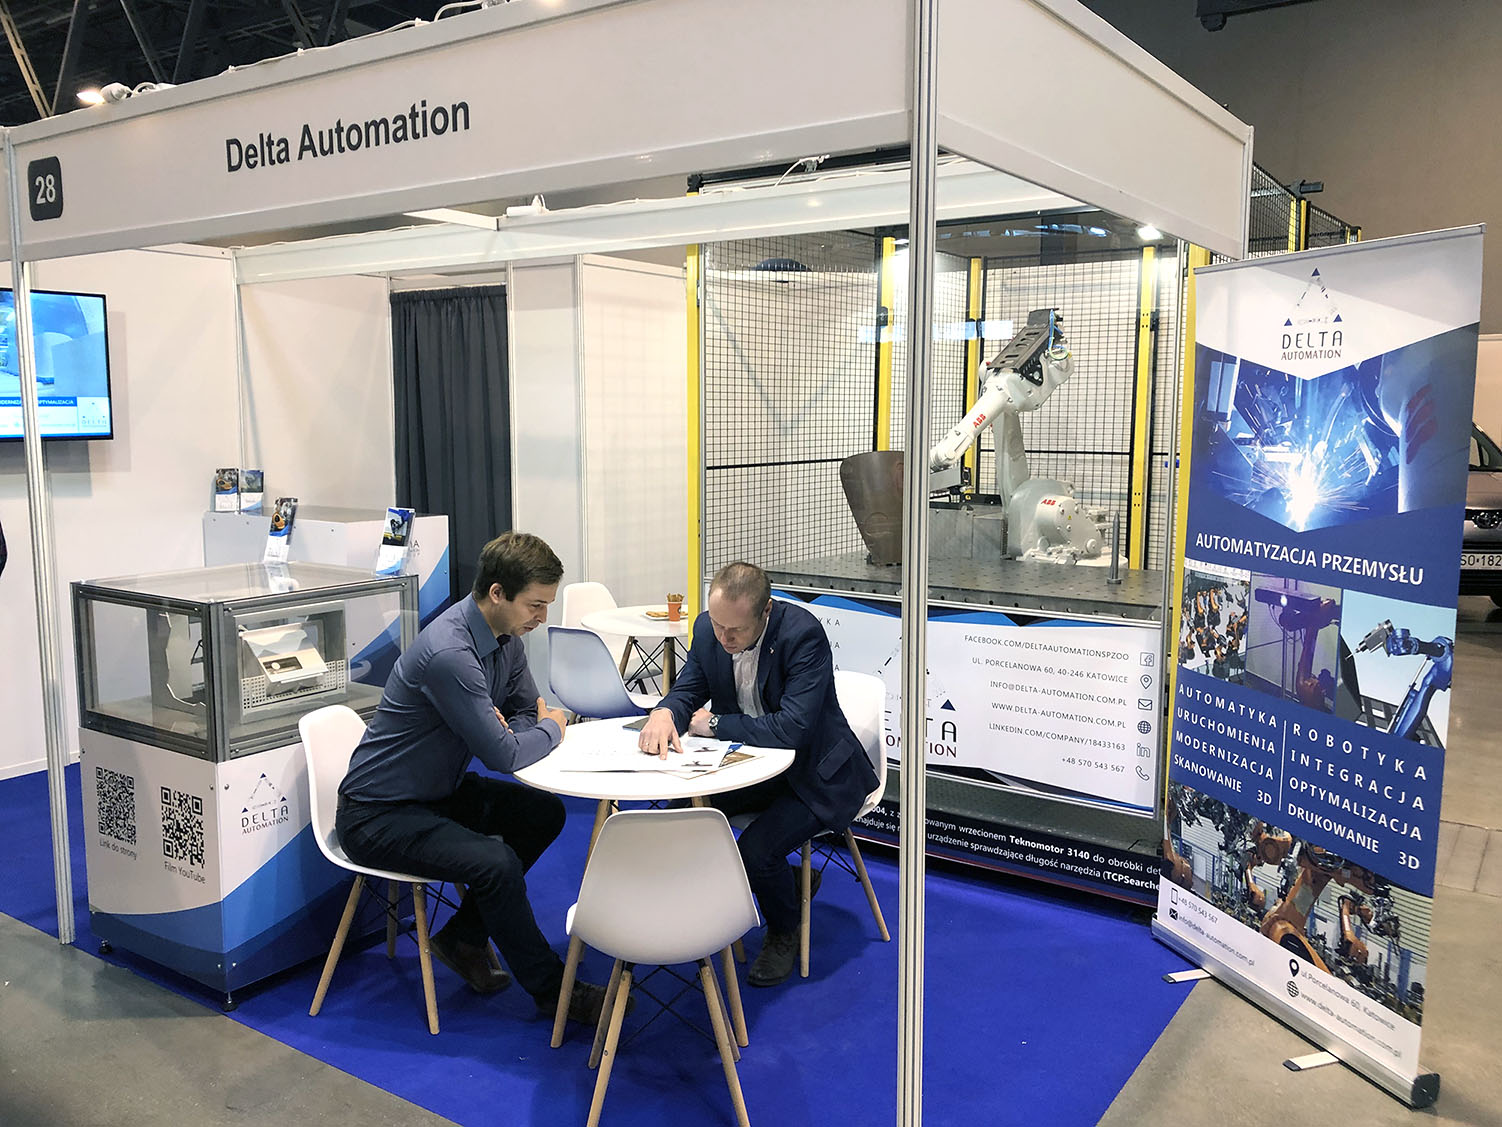 DELTA AUTOMATION at Expo SILESIA – The Trade Fair for Maintenance and Industrial Technology.